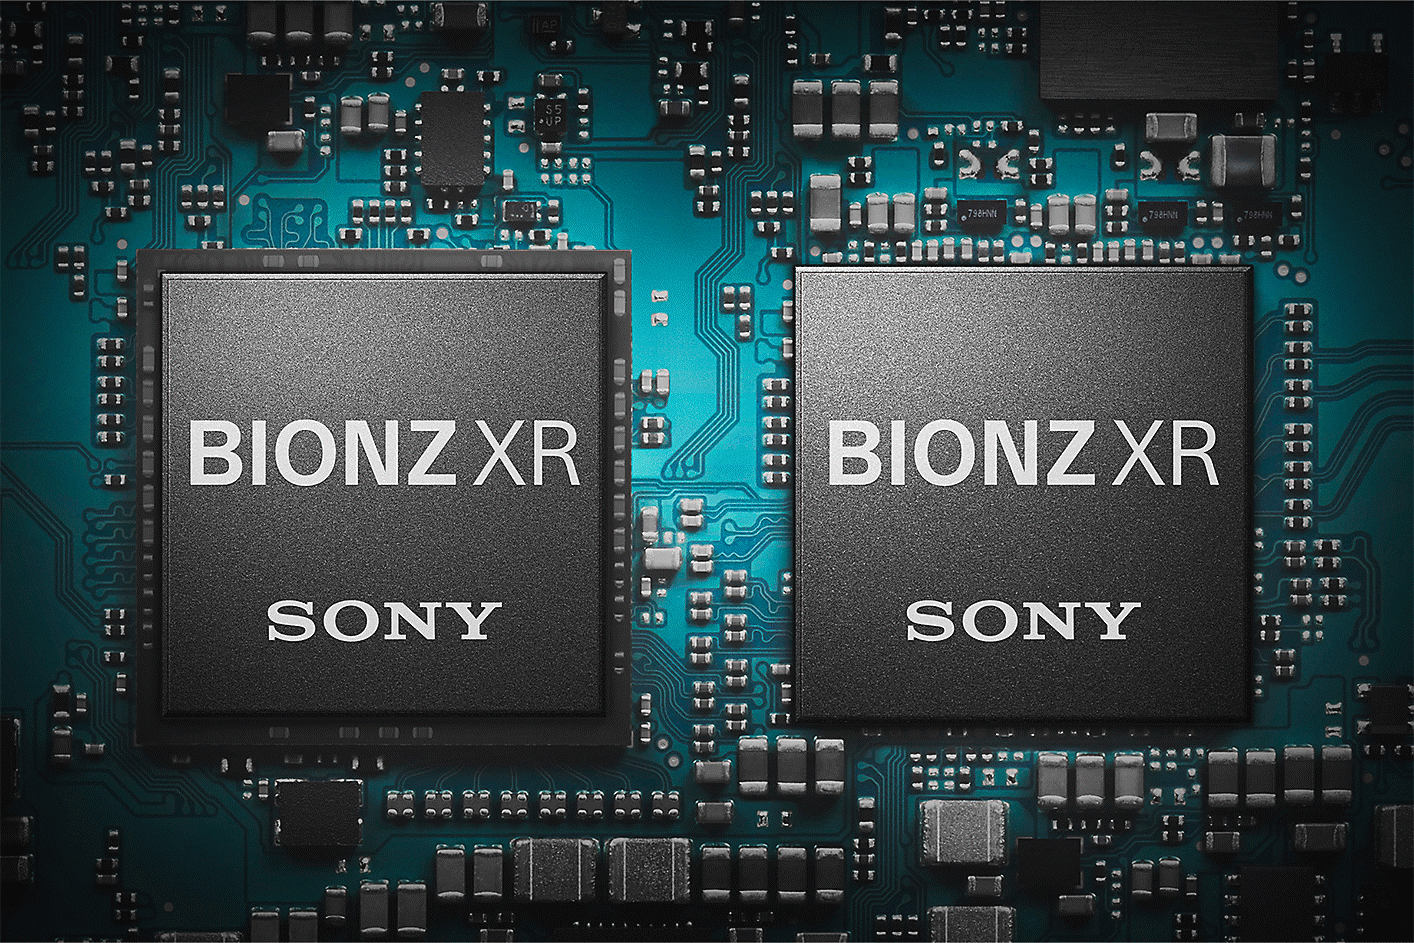 Photo of the BIONZ XR image processing engine